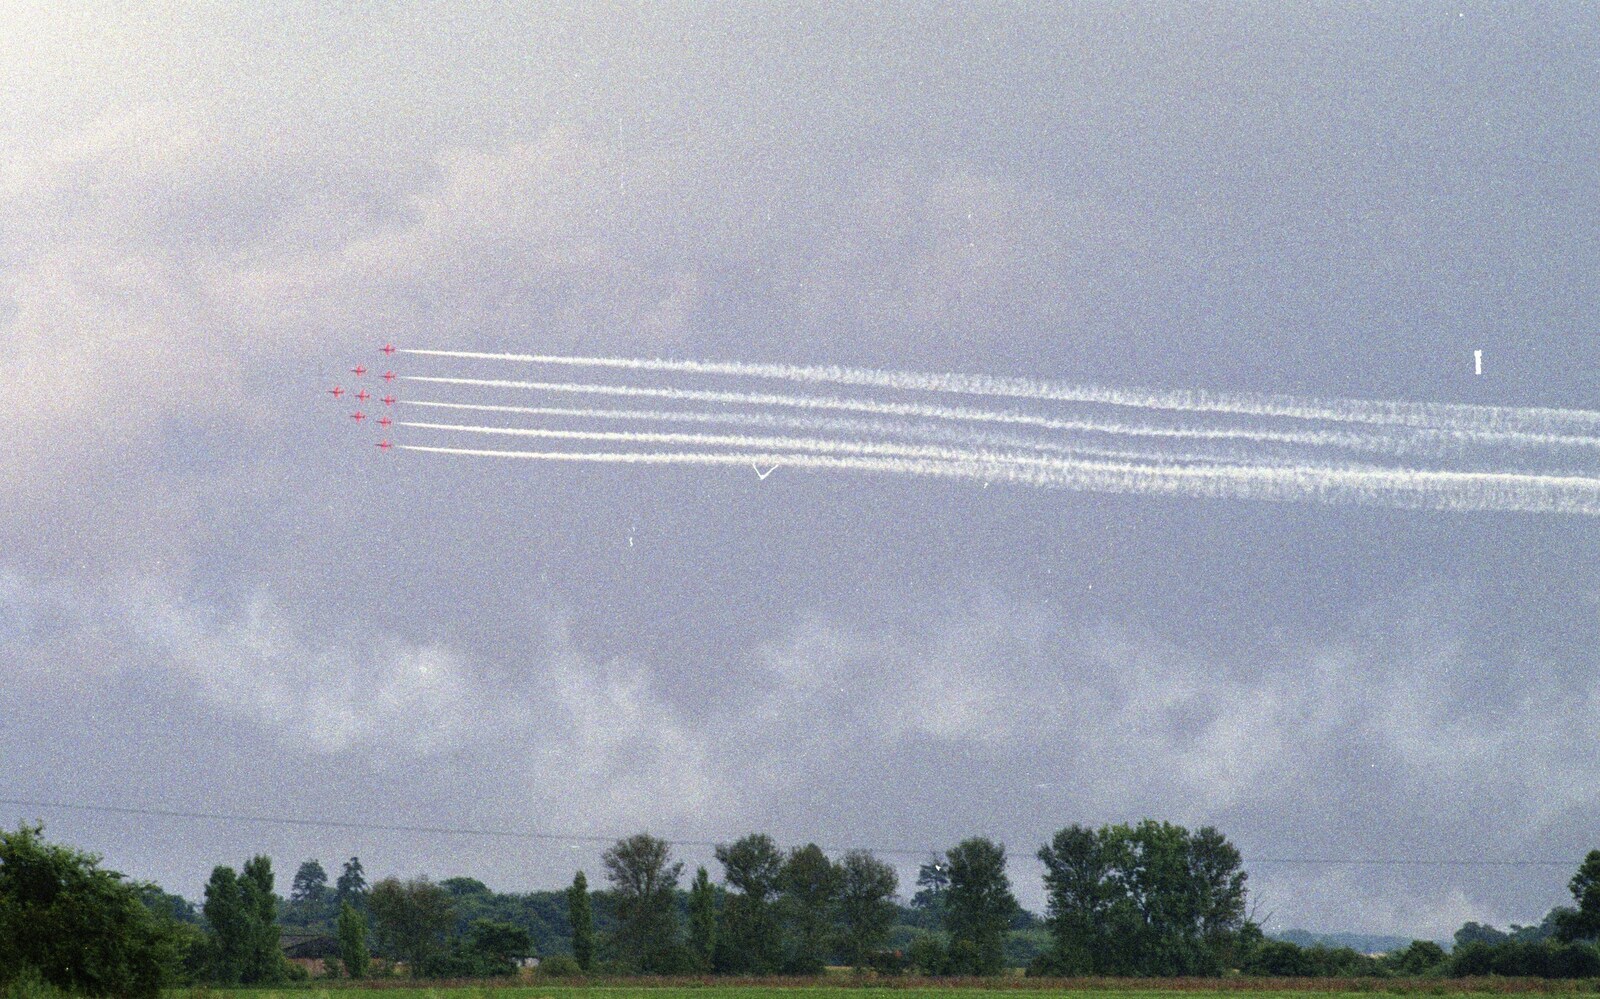 The Red Arrows, and Andrew's CISU Barbeque, Ipswich, Suffolk - 22nd July 2000: The Red Arrows with smoke on